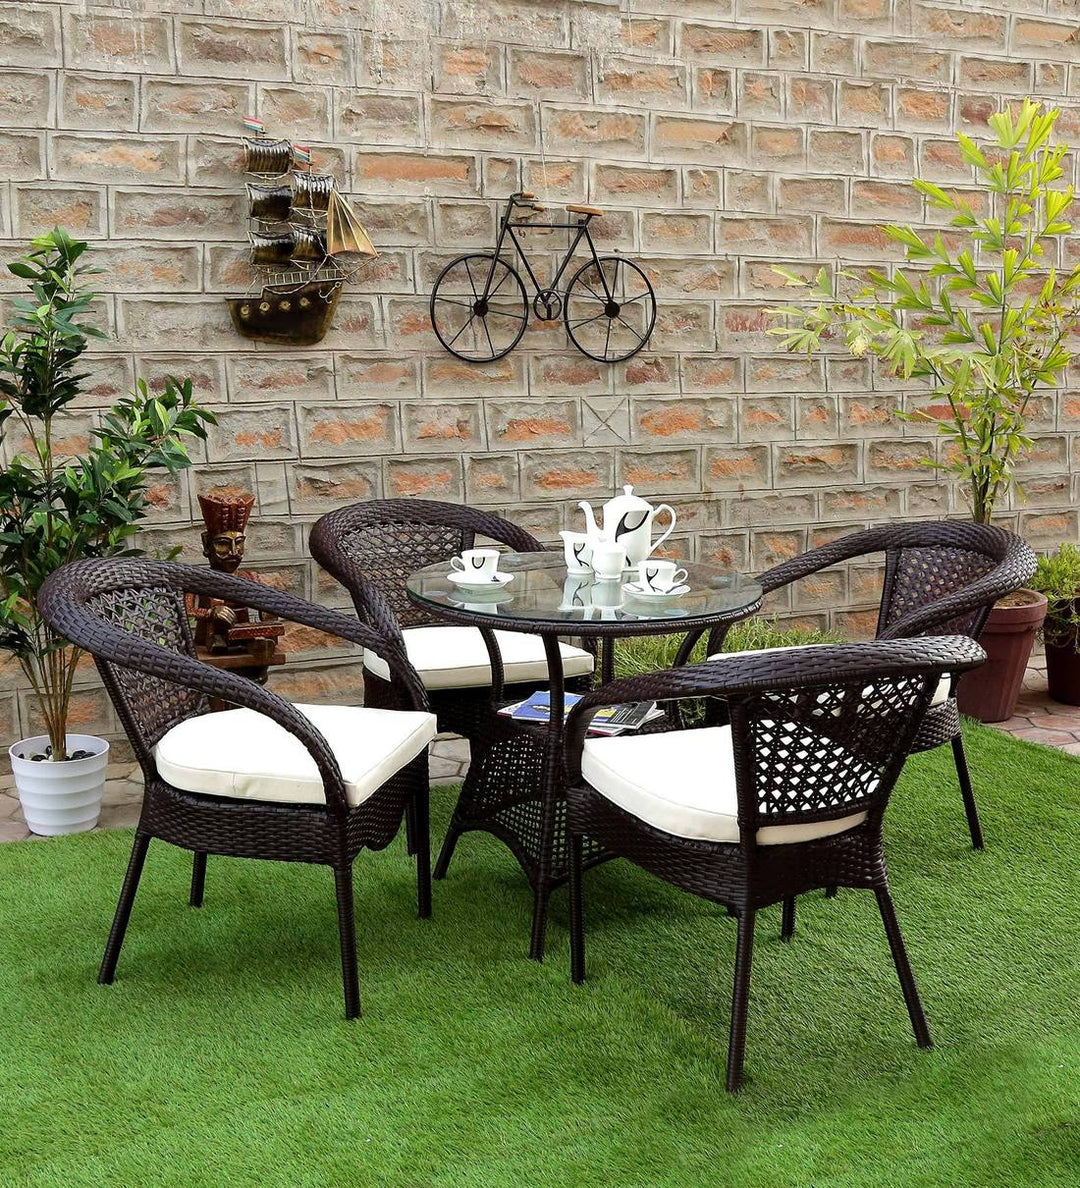 Dreamline Outdoor Furniture Garden Patio Seating Set 1+4 4 Chairs and Table Set Balcony Furniture Coffee Table Set (Dark Brown)